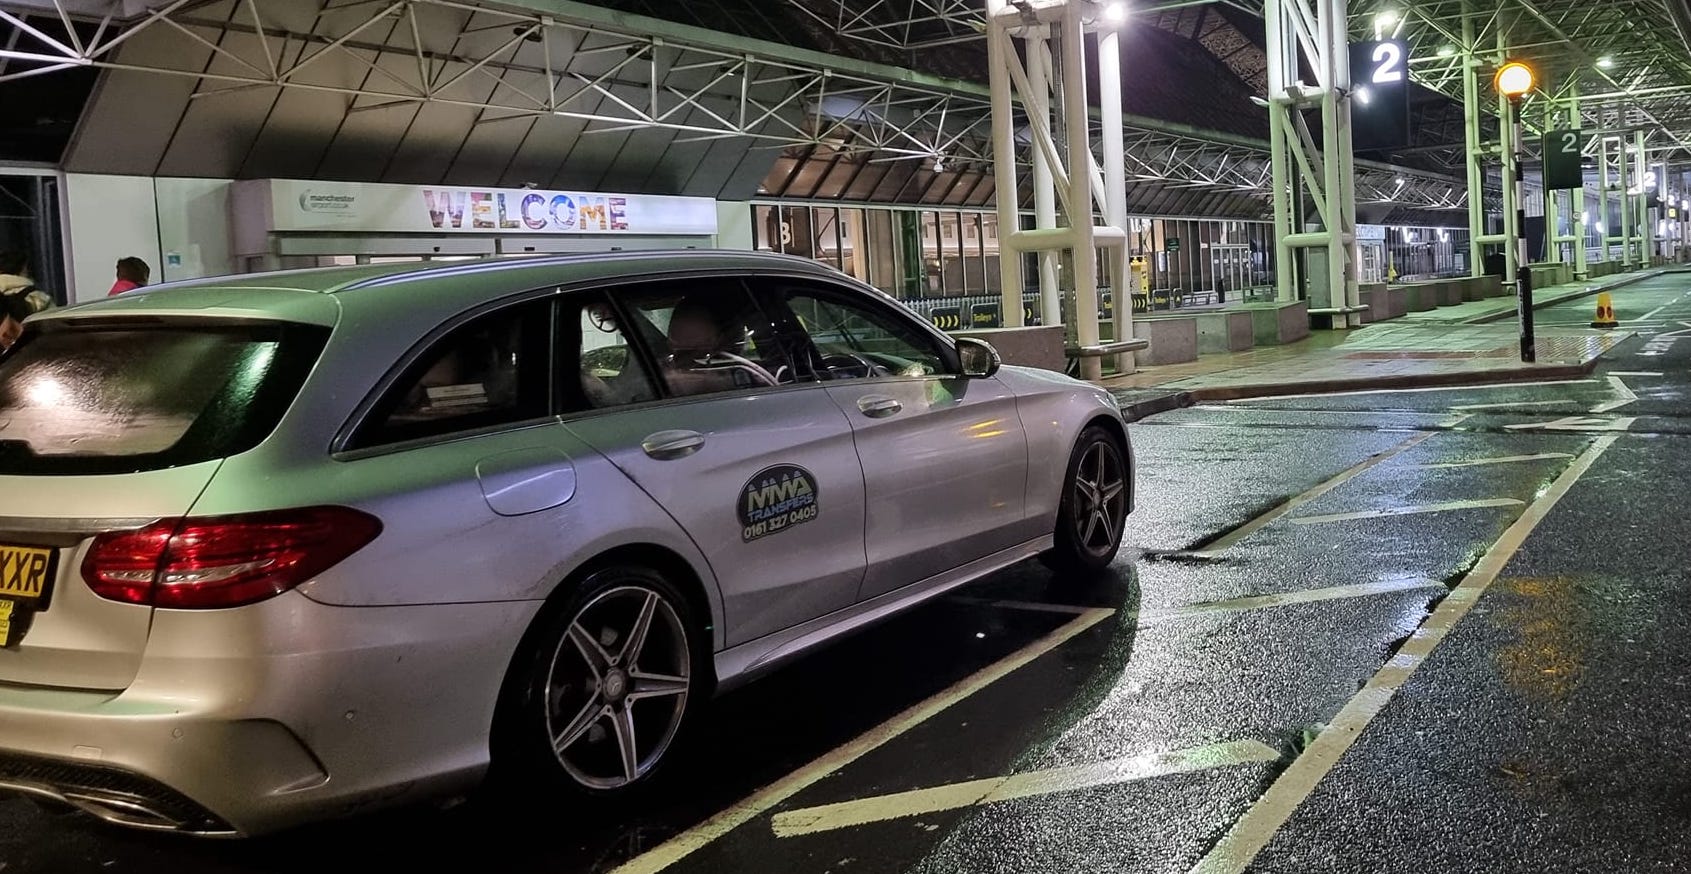 Take a Taxi from Manchester Airport to Heathrow Airport with a free Meet and Greet Service